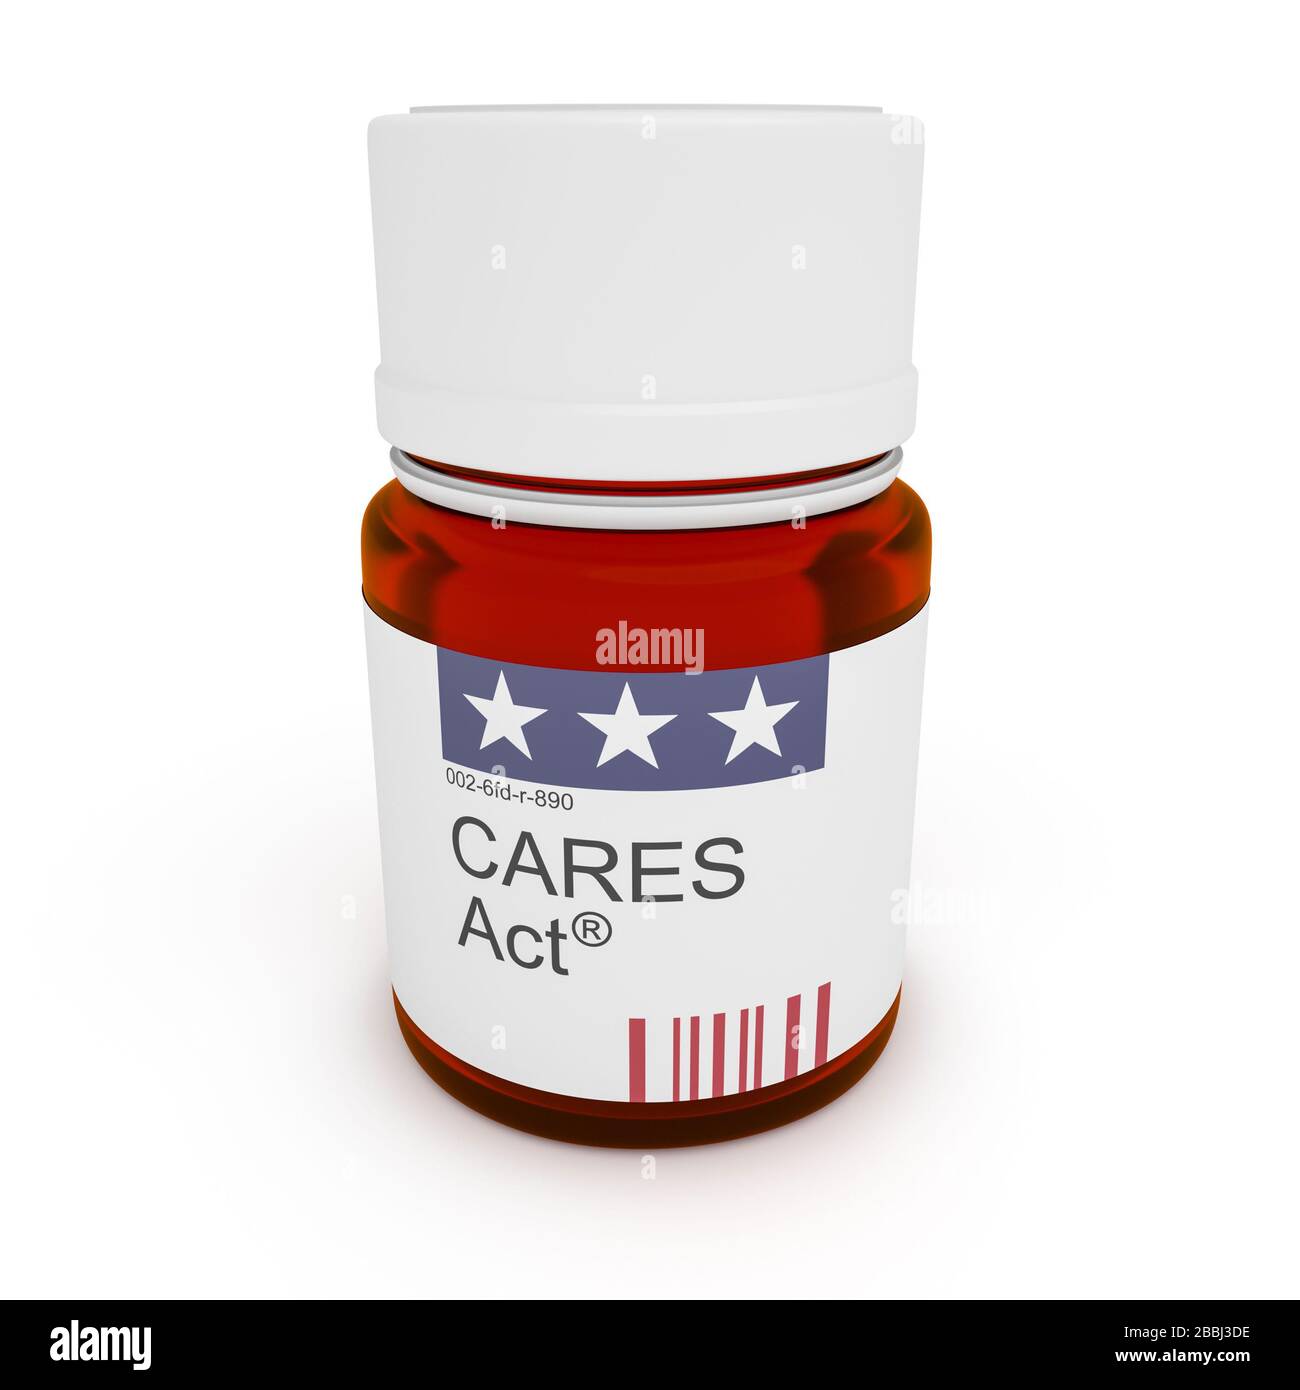 Coronavirus Aid, Relief, And Economic Security Act: Pill Bottle CARES Act, 3d illustration Stock Photo